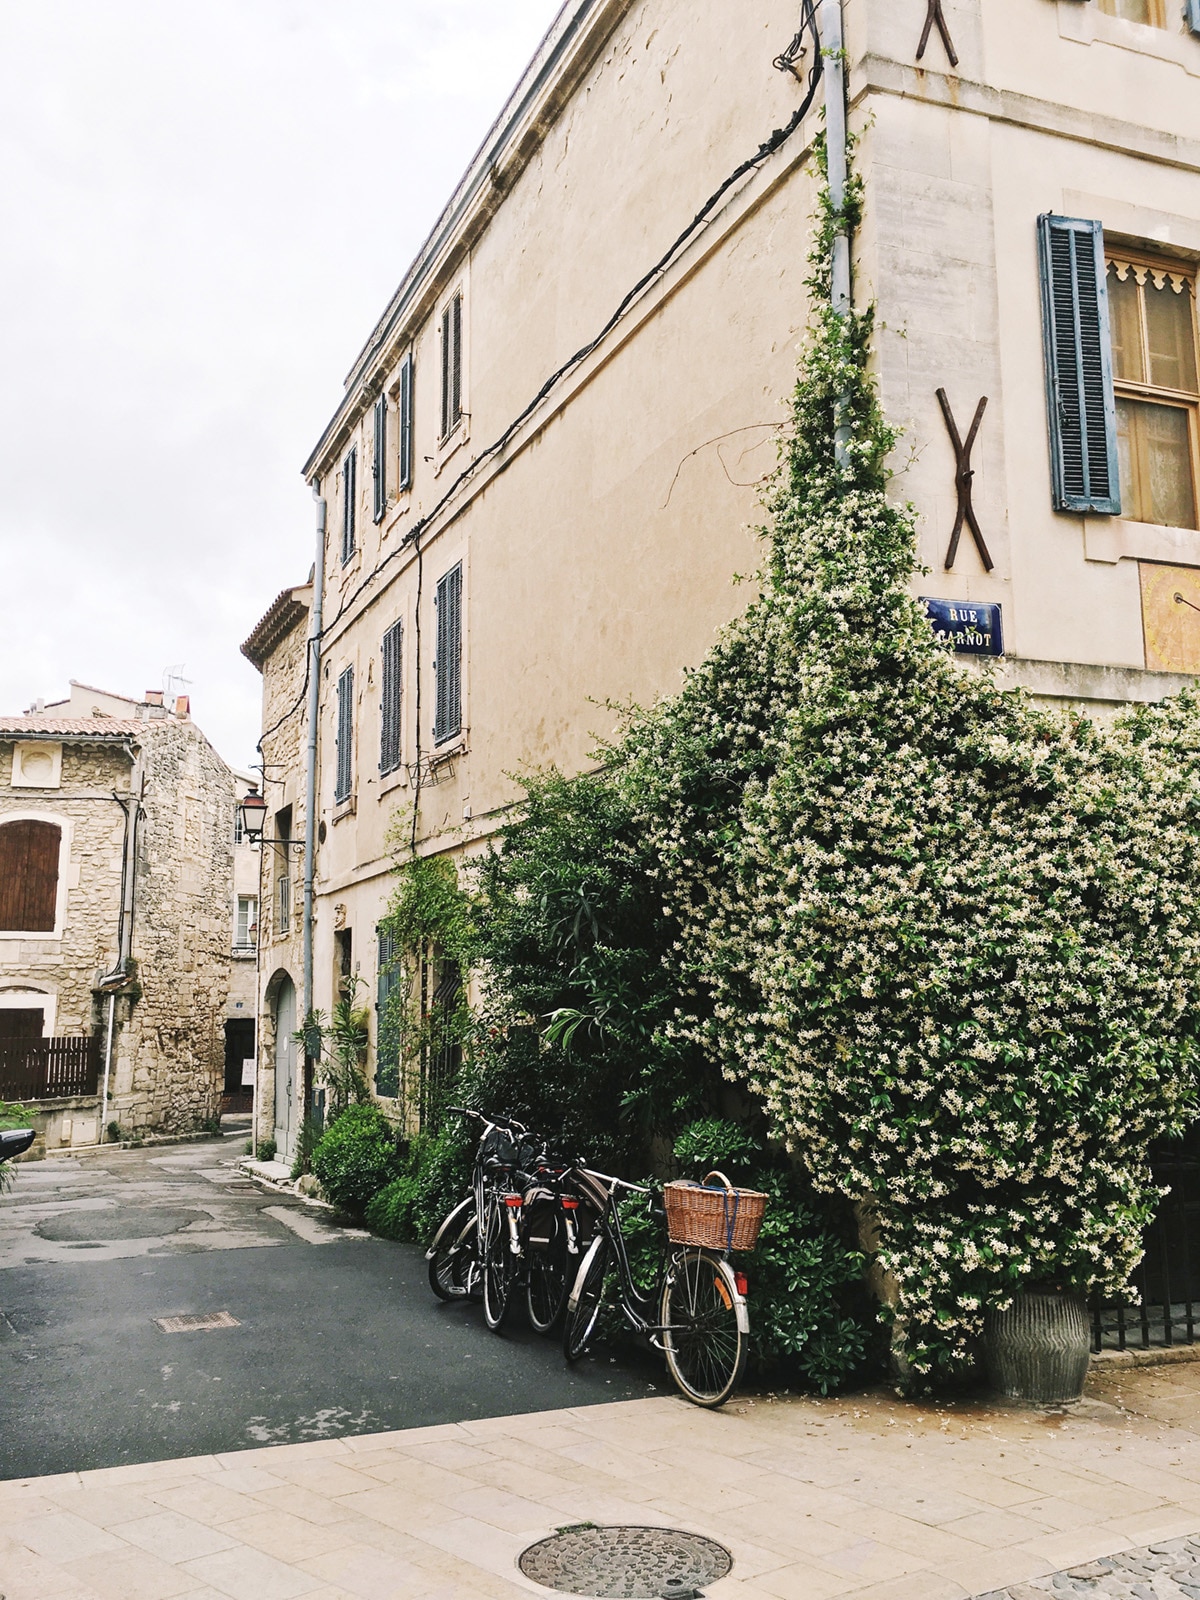 a charming corner of saint remy in provence | 24 hour travel guide from coco kelley